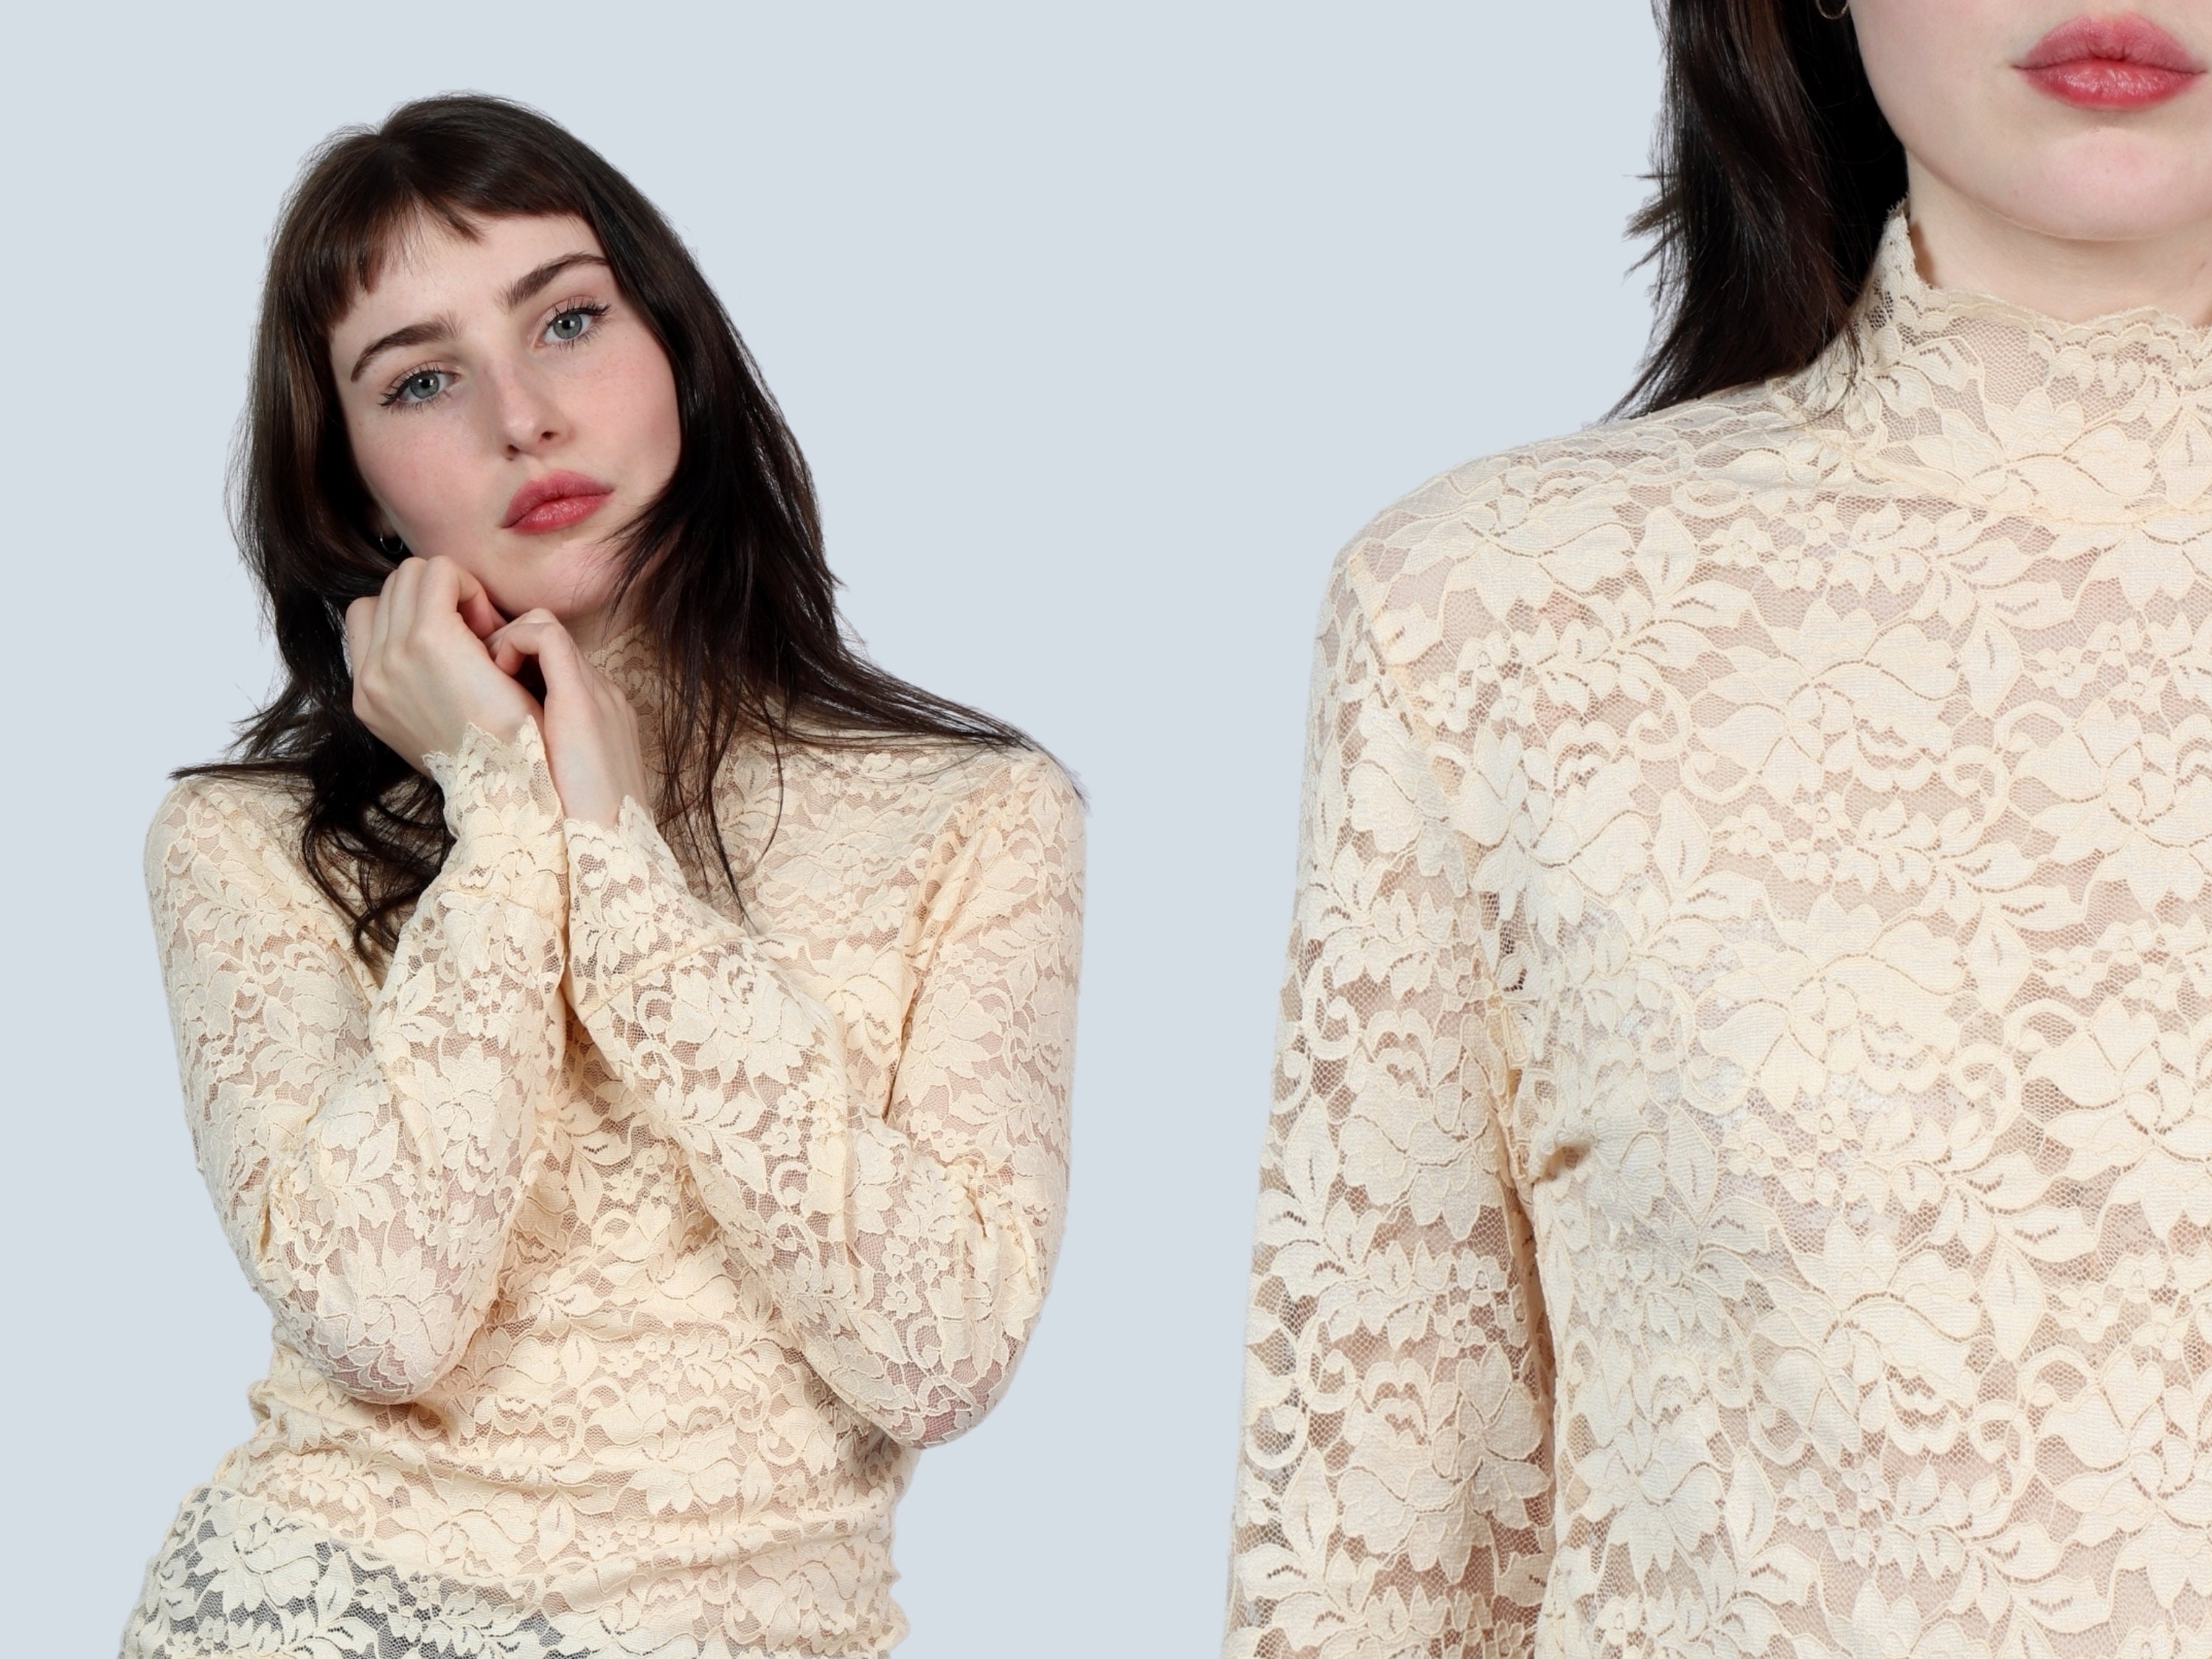 Cream Chantilly Lace Top / Mock Neck / Gift for Her / Stretchy 